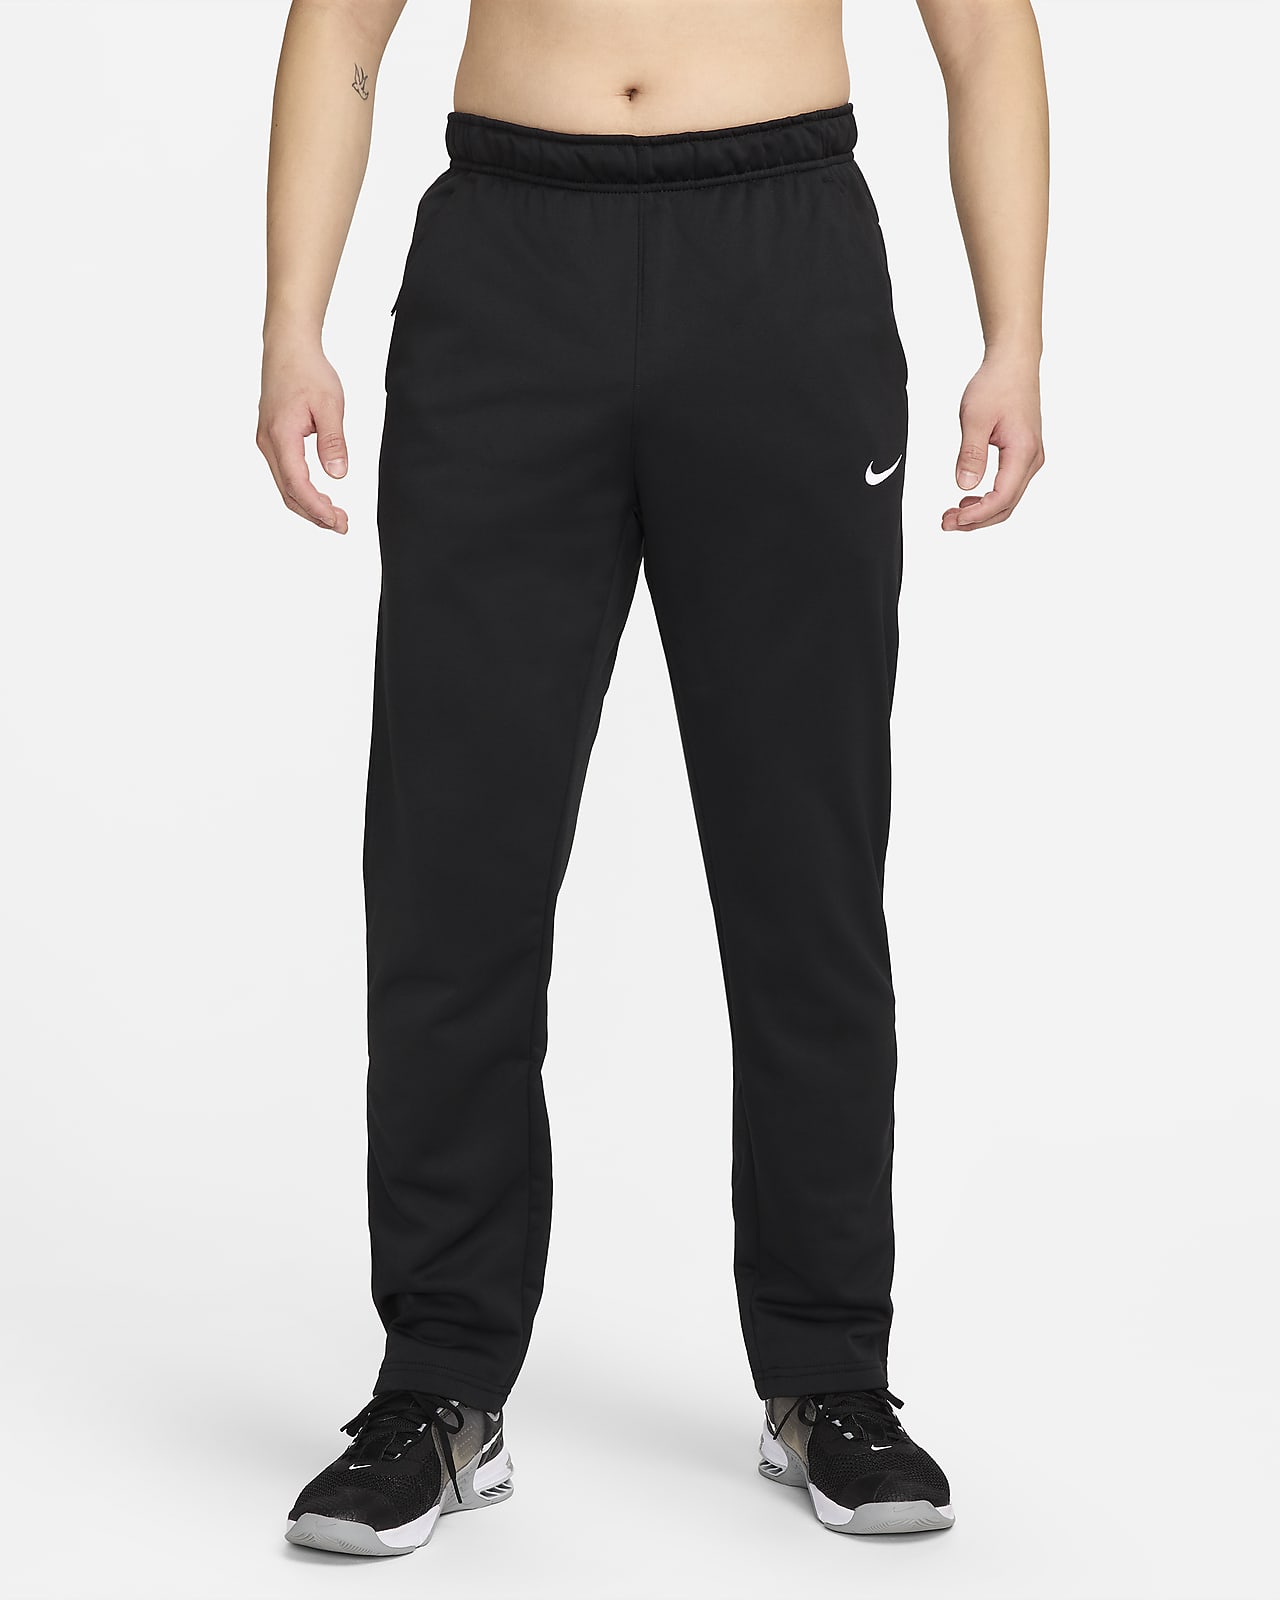 Men's L Nike Therma-FIT Colorblock Training Athletic Pants Brown DD2108-203  | eBay